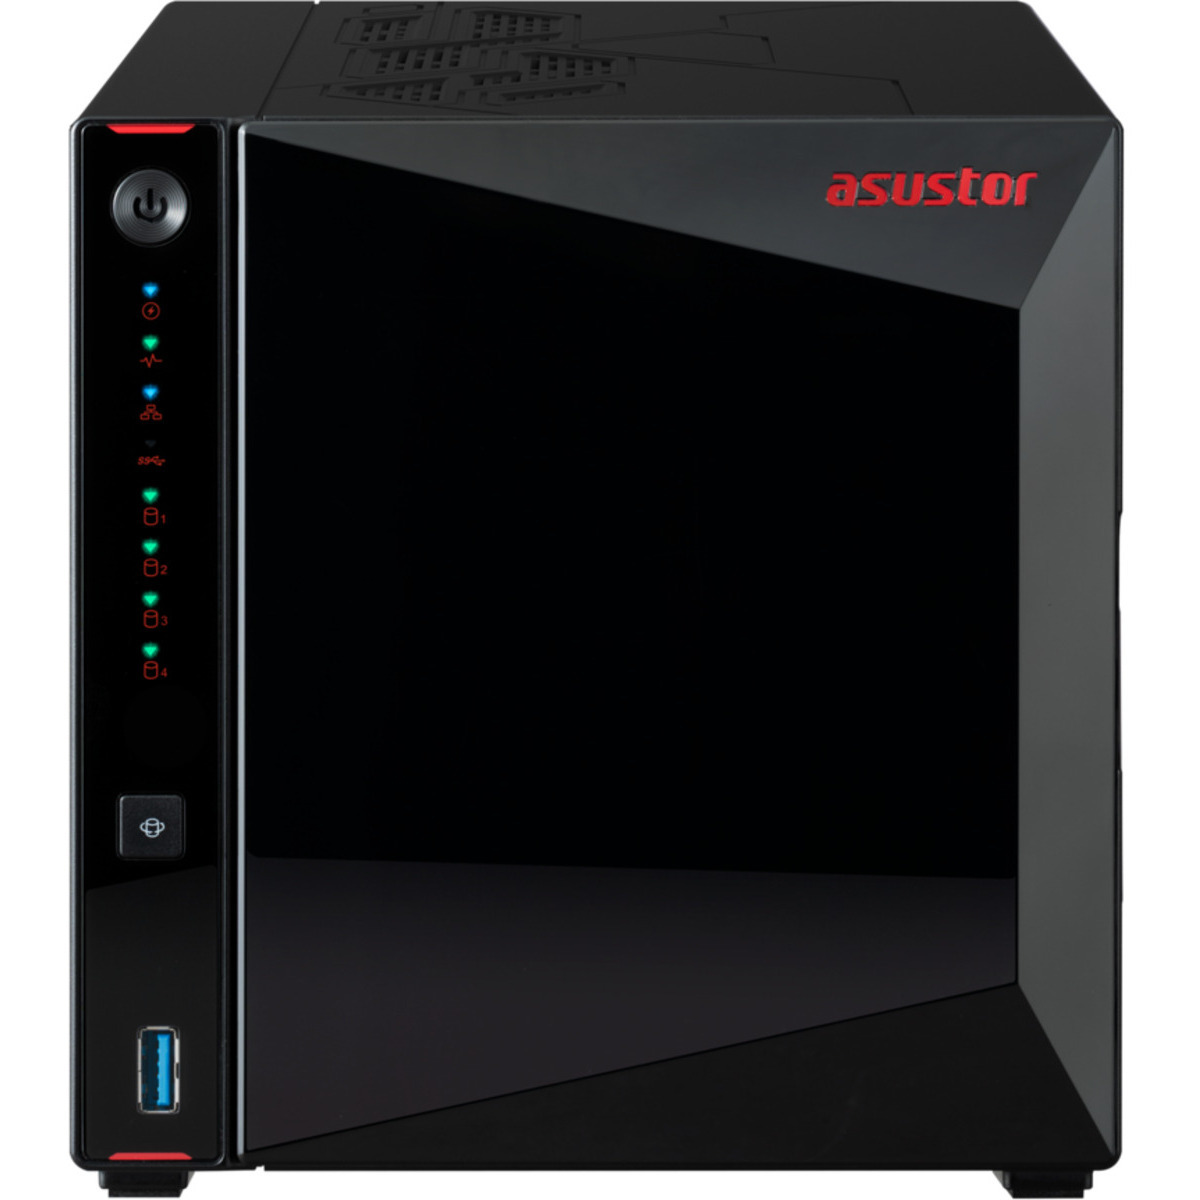 ASUSTOR Nimbustor 4 Gen2 AS5404T 96tb 4-Bay Desktop Multimedia / Power User / Business NAS - Network Attached Storage Device 4x24tb Seagate IronWolf Pro ST24000NT002 3.5 7200rpm SATA 6Gb/s HDD NAS Class Drives Installed - Burn-In Tested - FREE RAM UPGRADE Nimbustor 4 Gen2 AS5404T